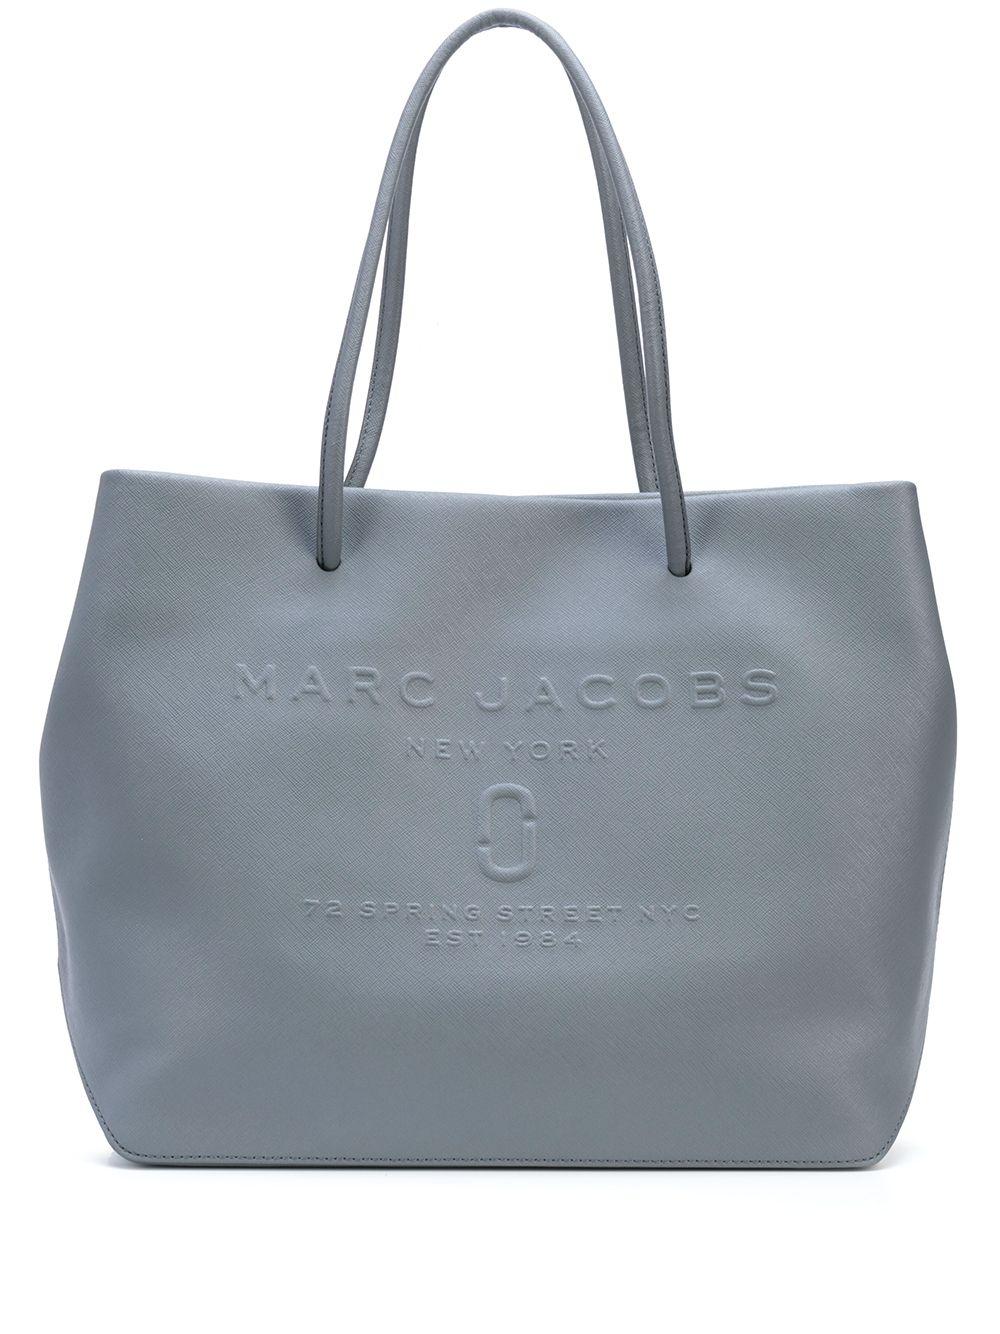 Marc Jacobs Leather The East West Logo Shopper Tote Bag in Grey 